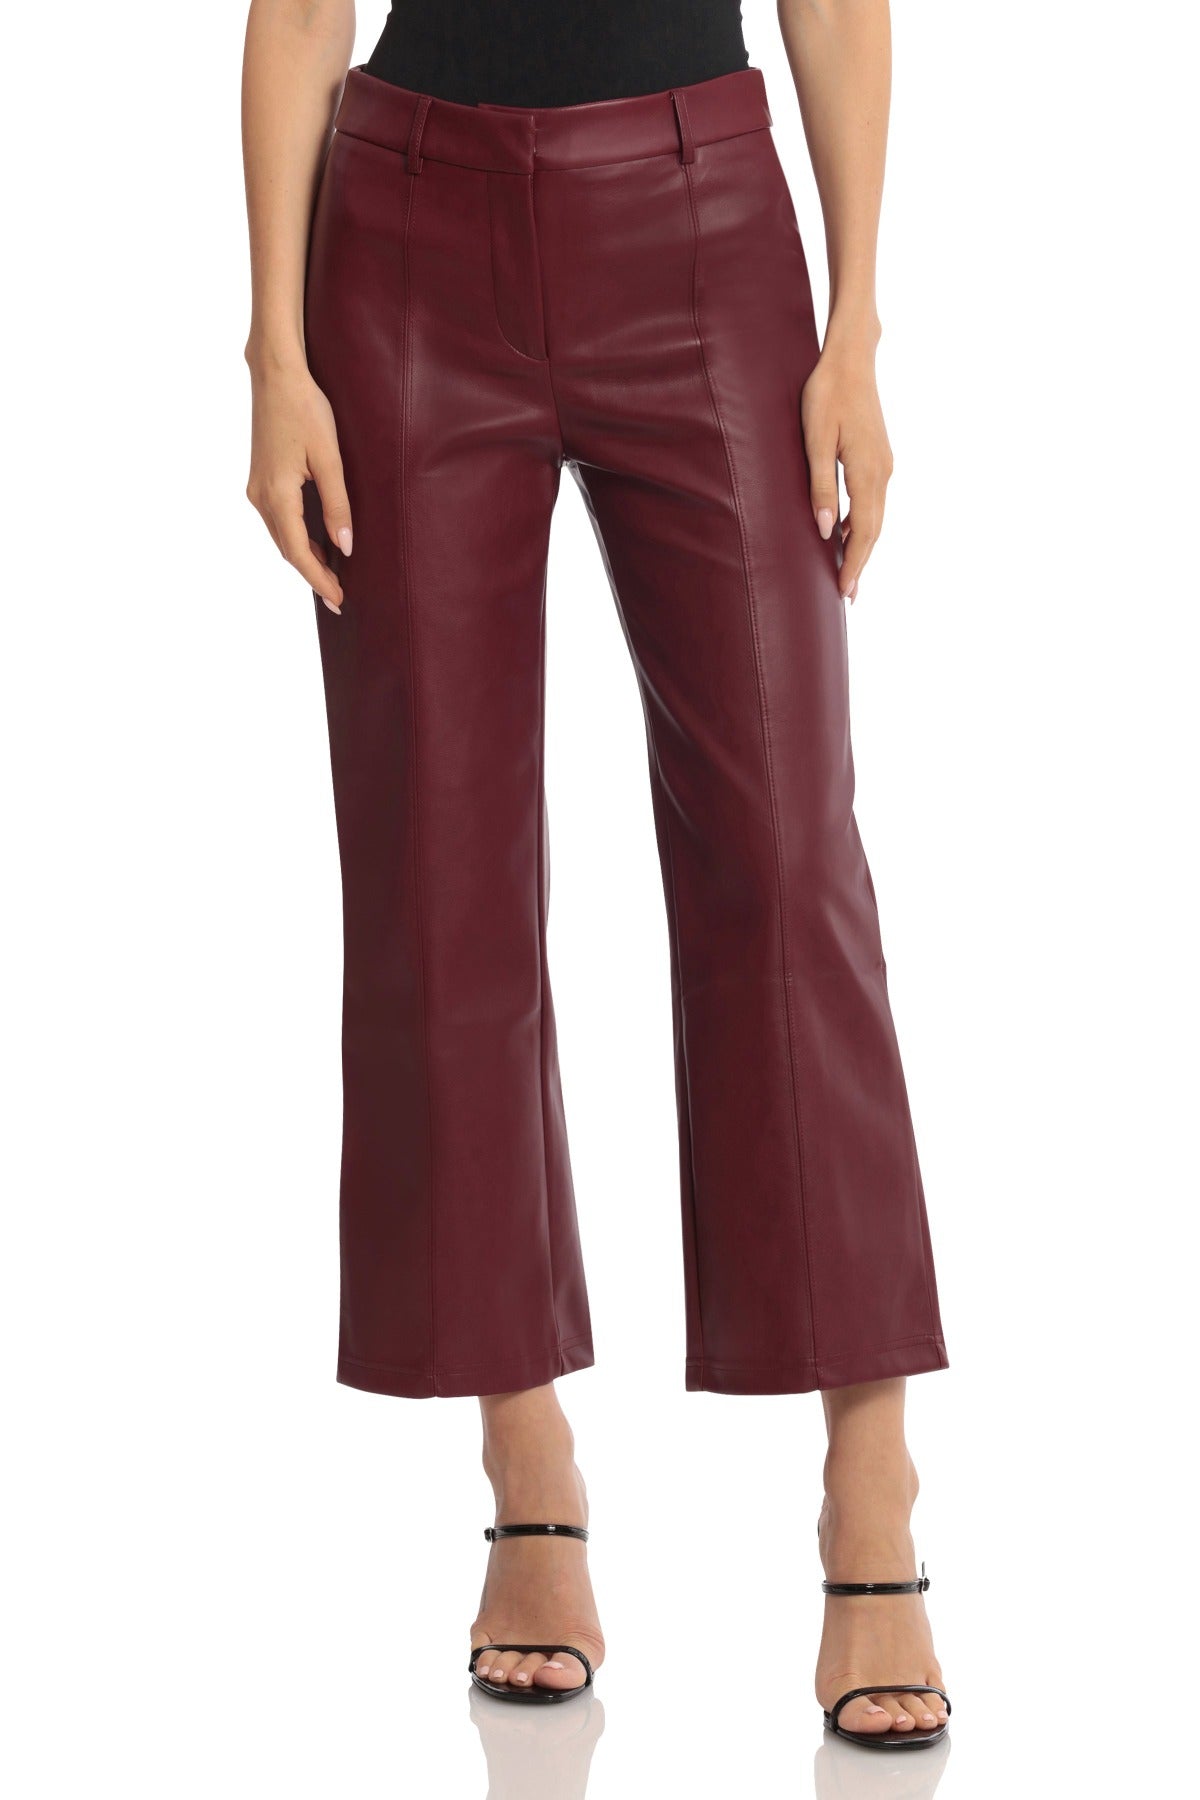 Faux Leather Seam-Front Straight Leg Trouser Pants Oxblood Red - Figure Flattering Work Appropriate Bottoms for Women